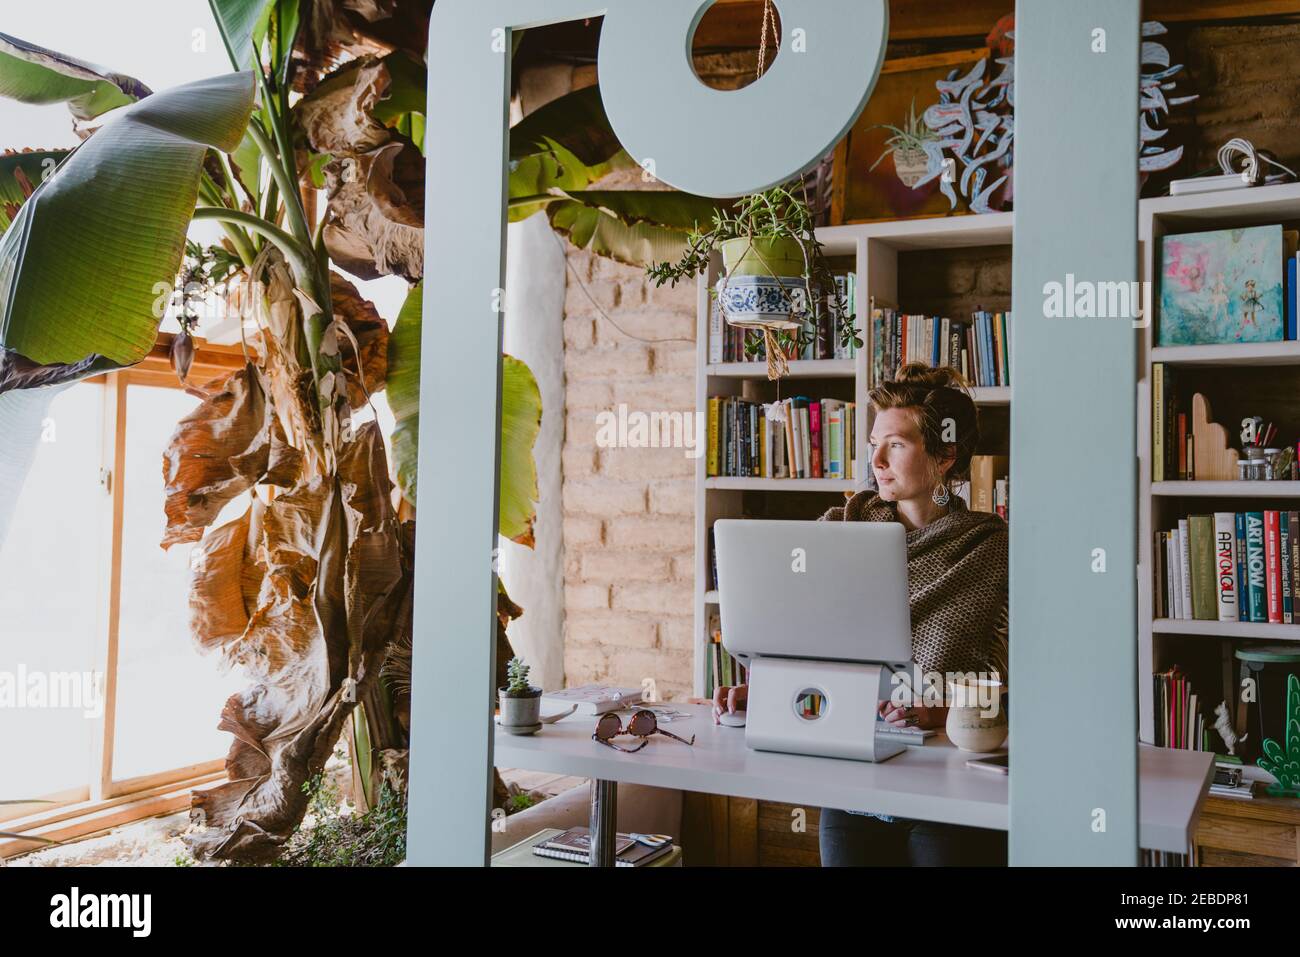 Woman works on laptop from home office surrounded by books and plants Stock Photo